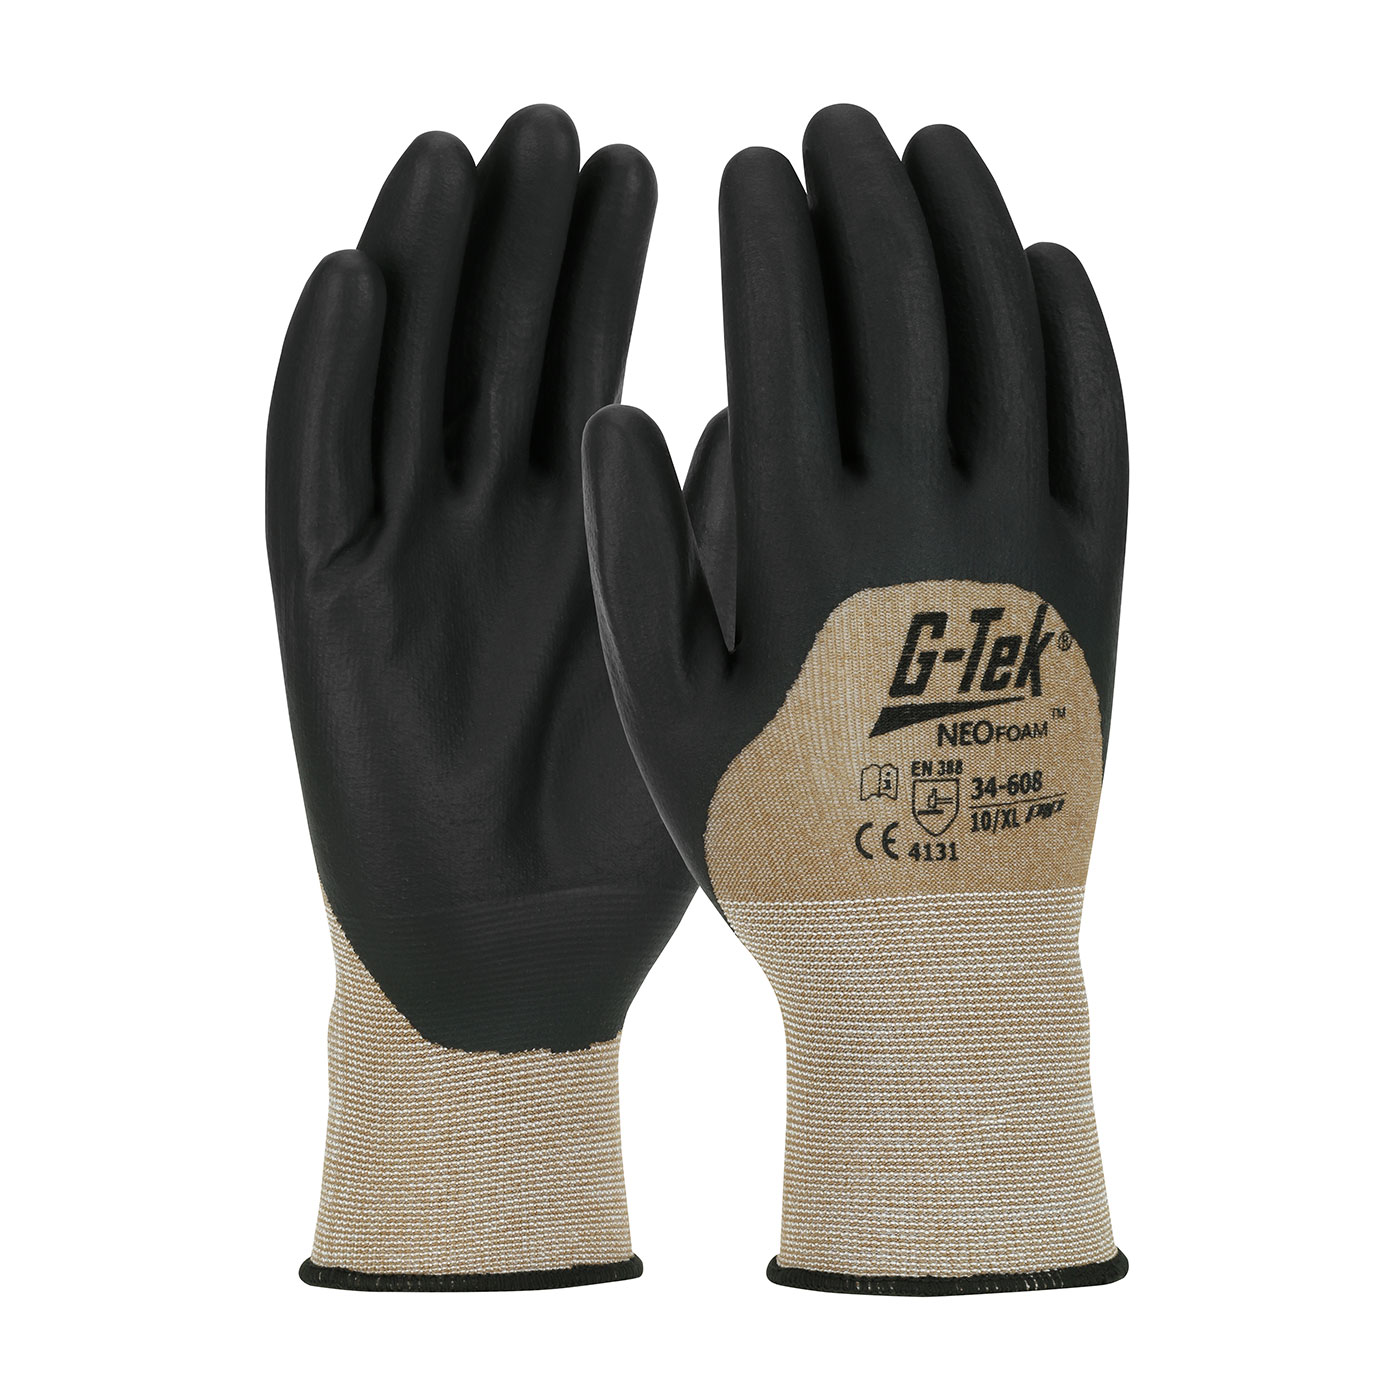 #34-608 PIP® G-Tek® Seamless Nylon Knit Gloves with Neofoam Coated Palms, Fingers and Knuckles